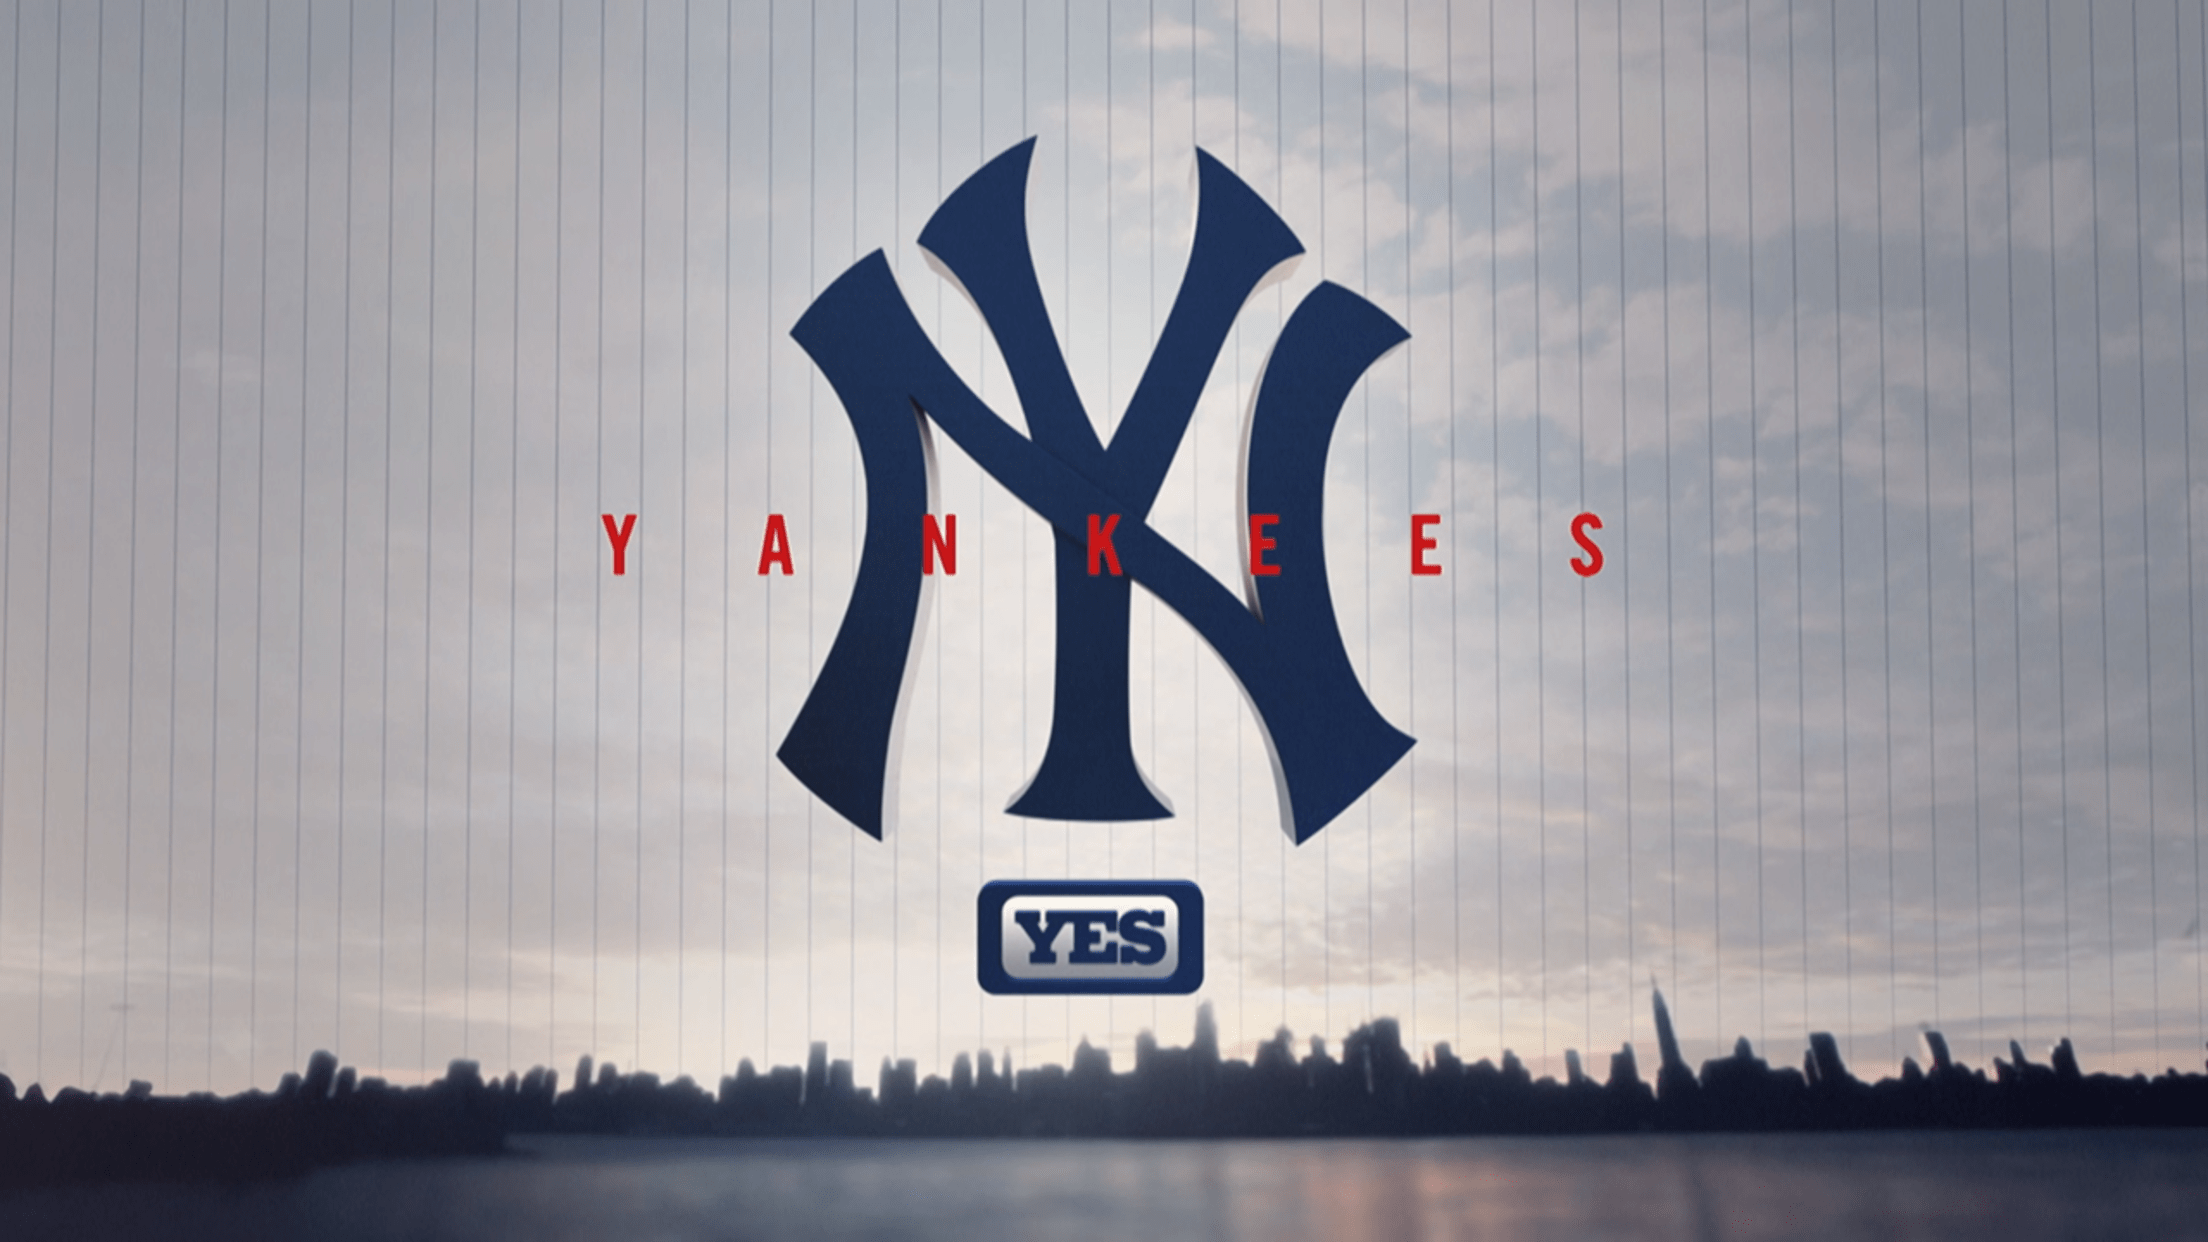 New York Yankees Pre & Postgame YES Network